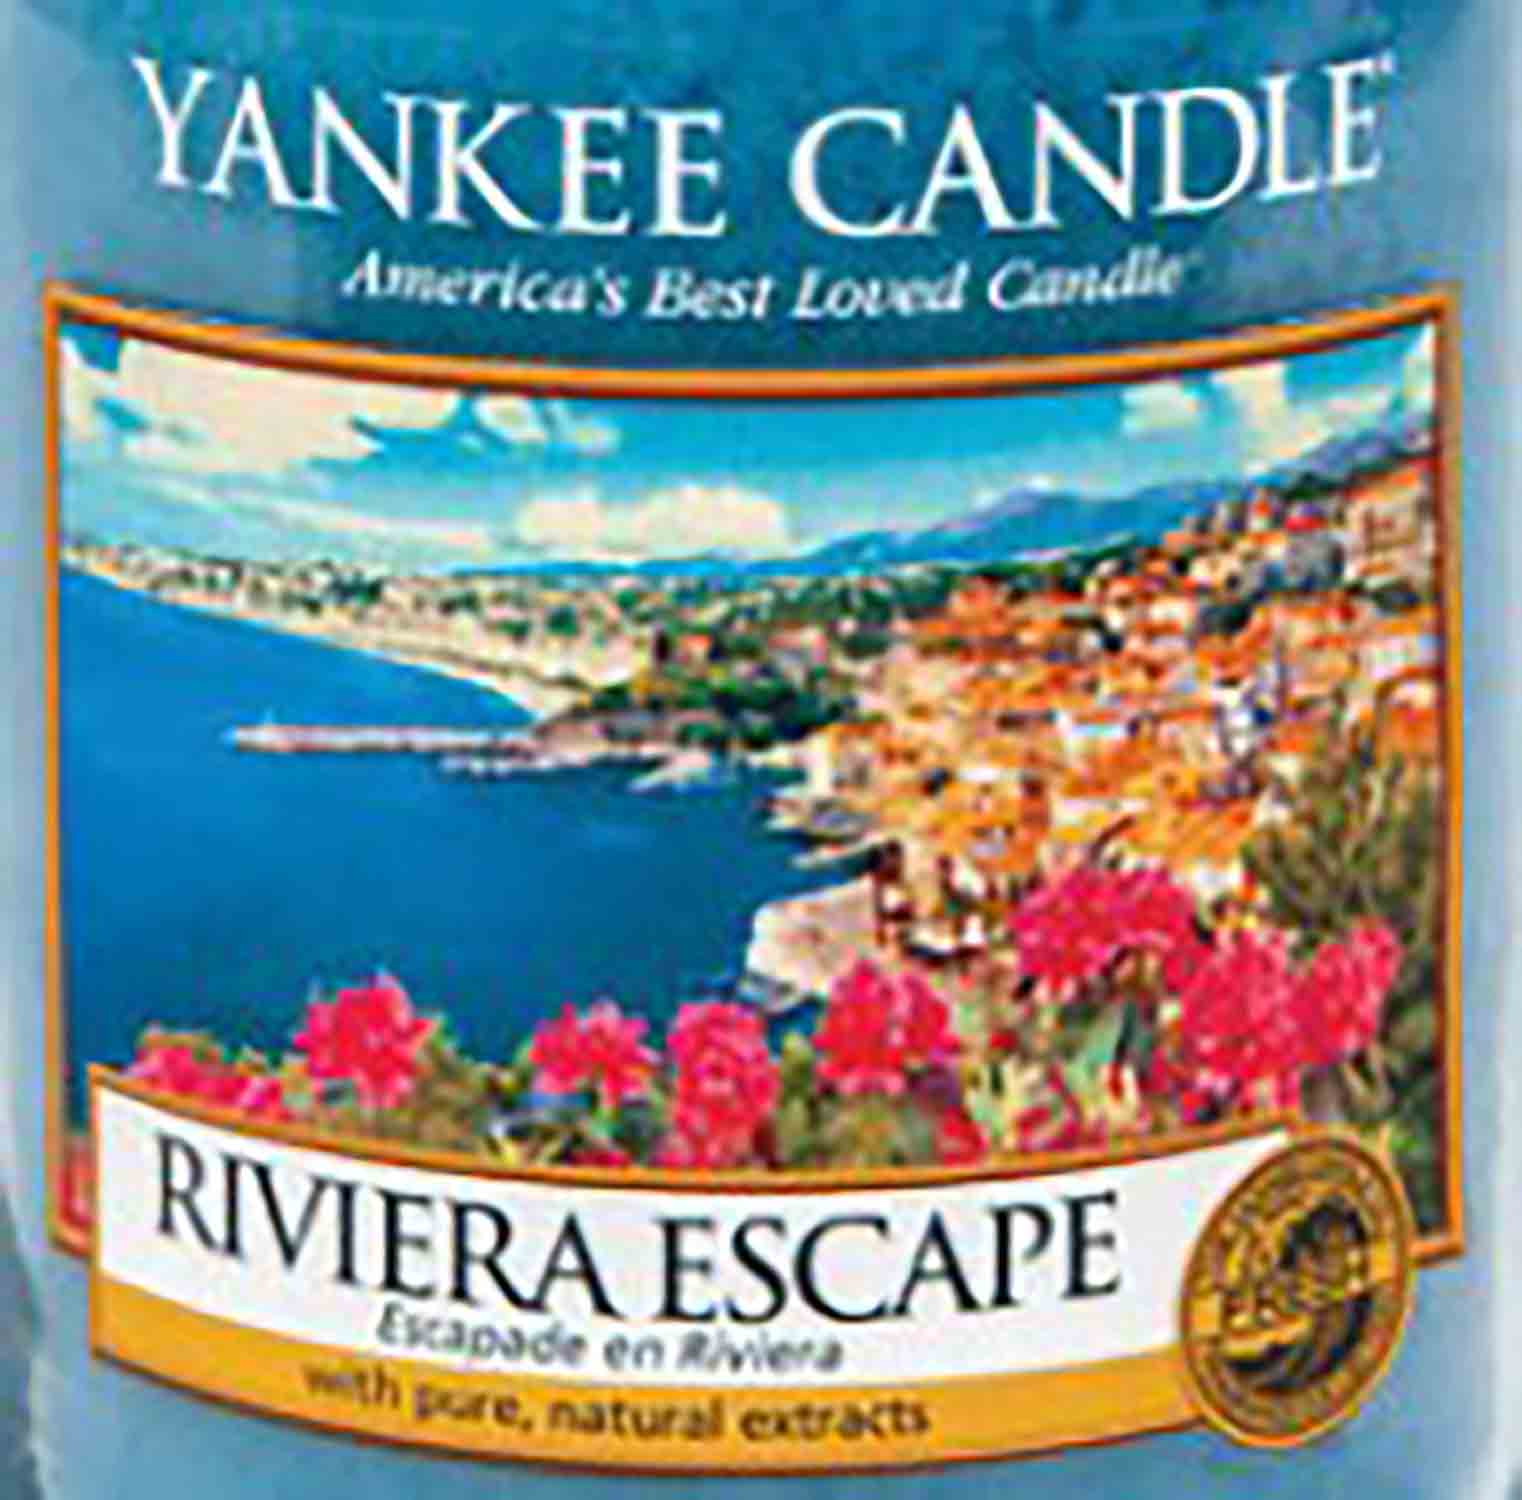 Yankee Candle Riviera Escape USA 22 g - Crumble vosk